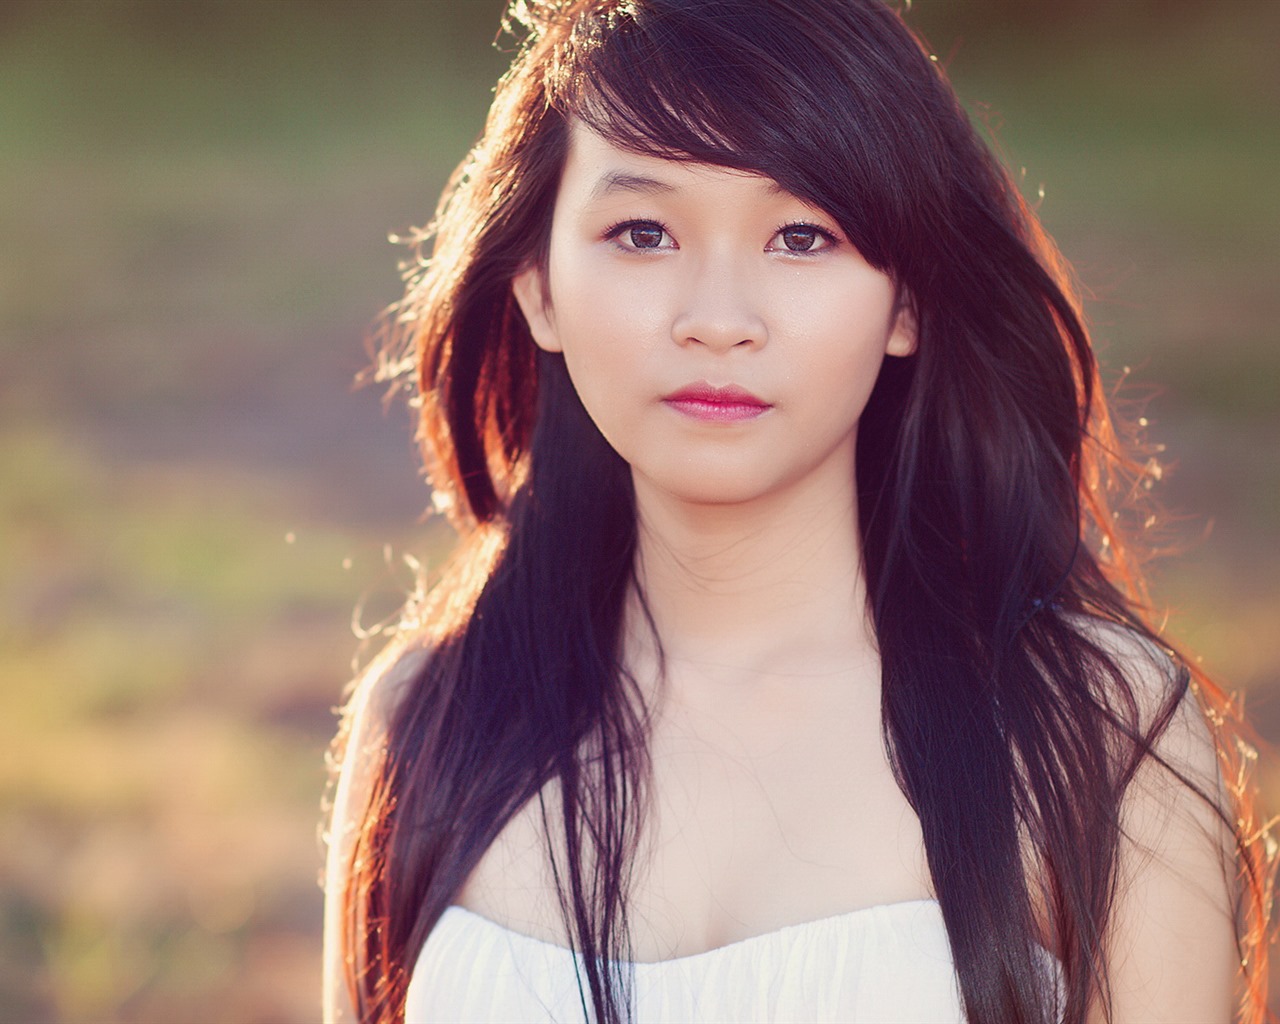 Pure and lovely young Asian girl HD wallpapers collection (4) #25 - 1280x1024